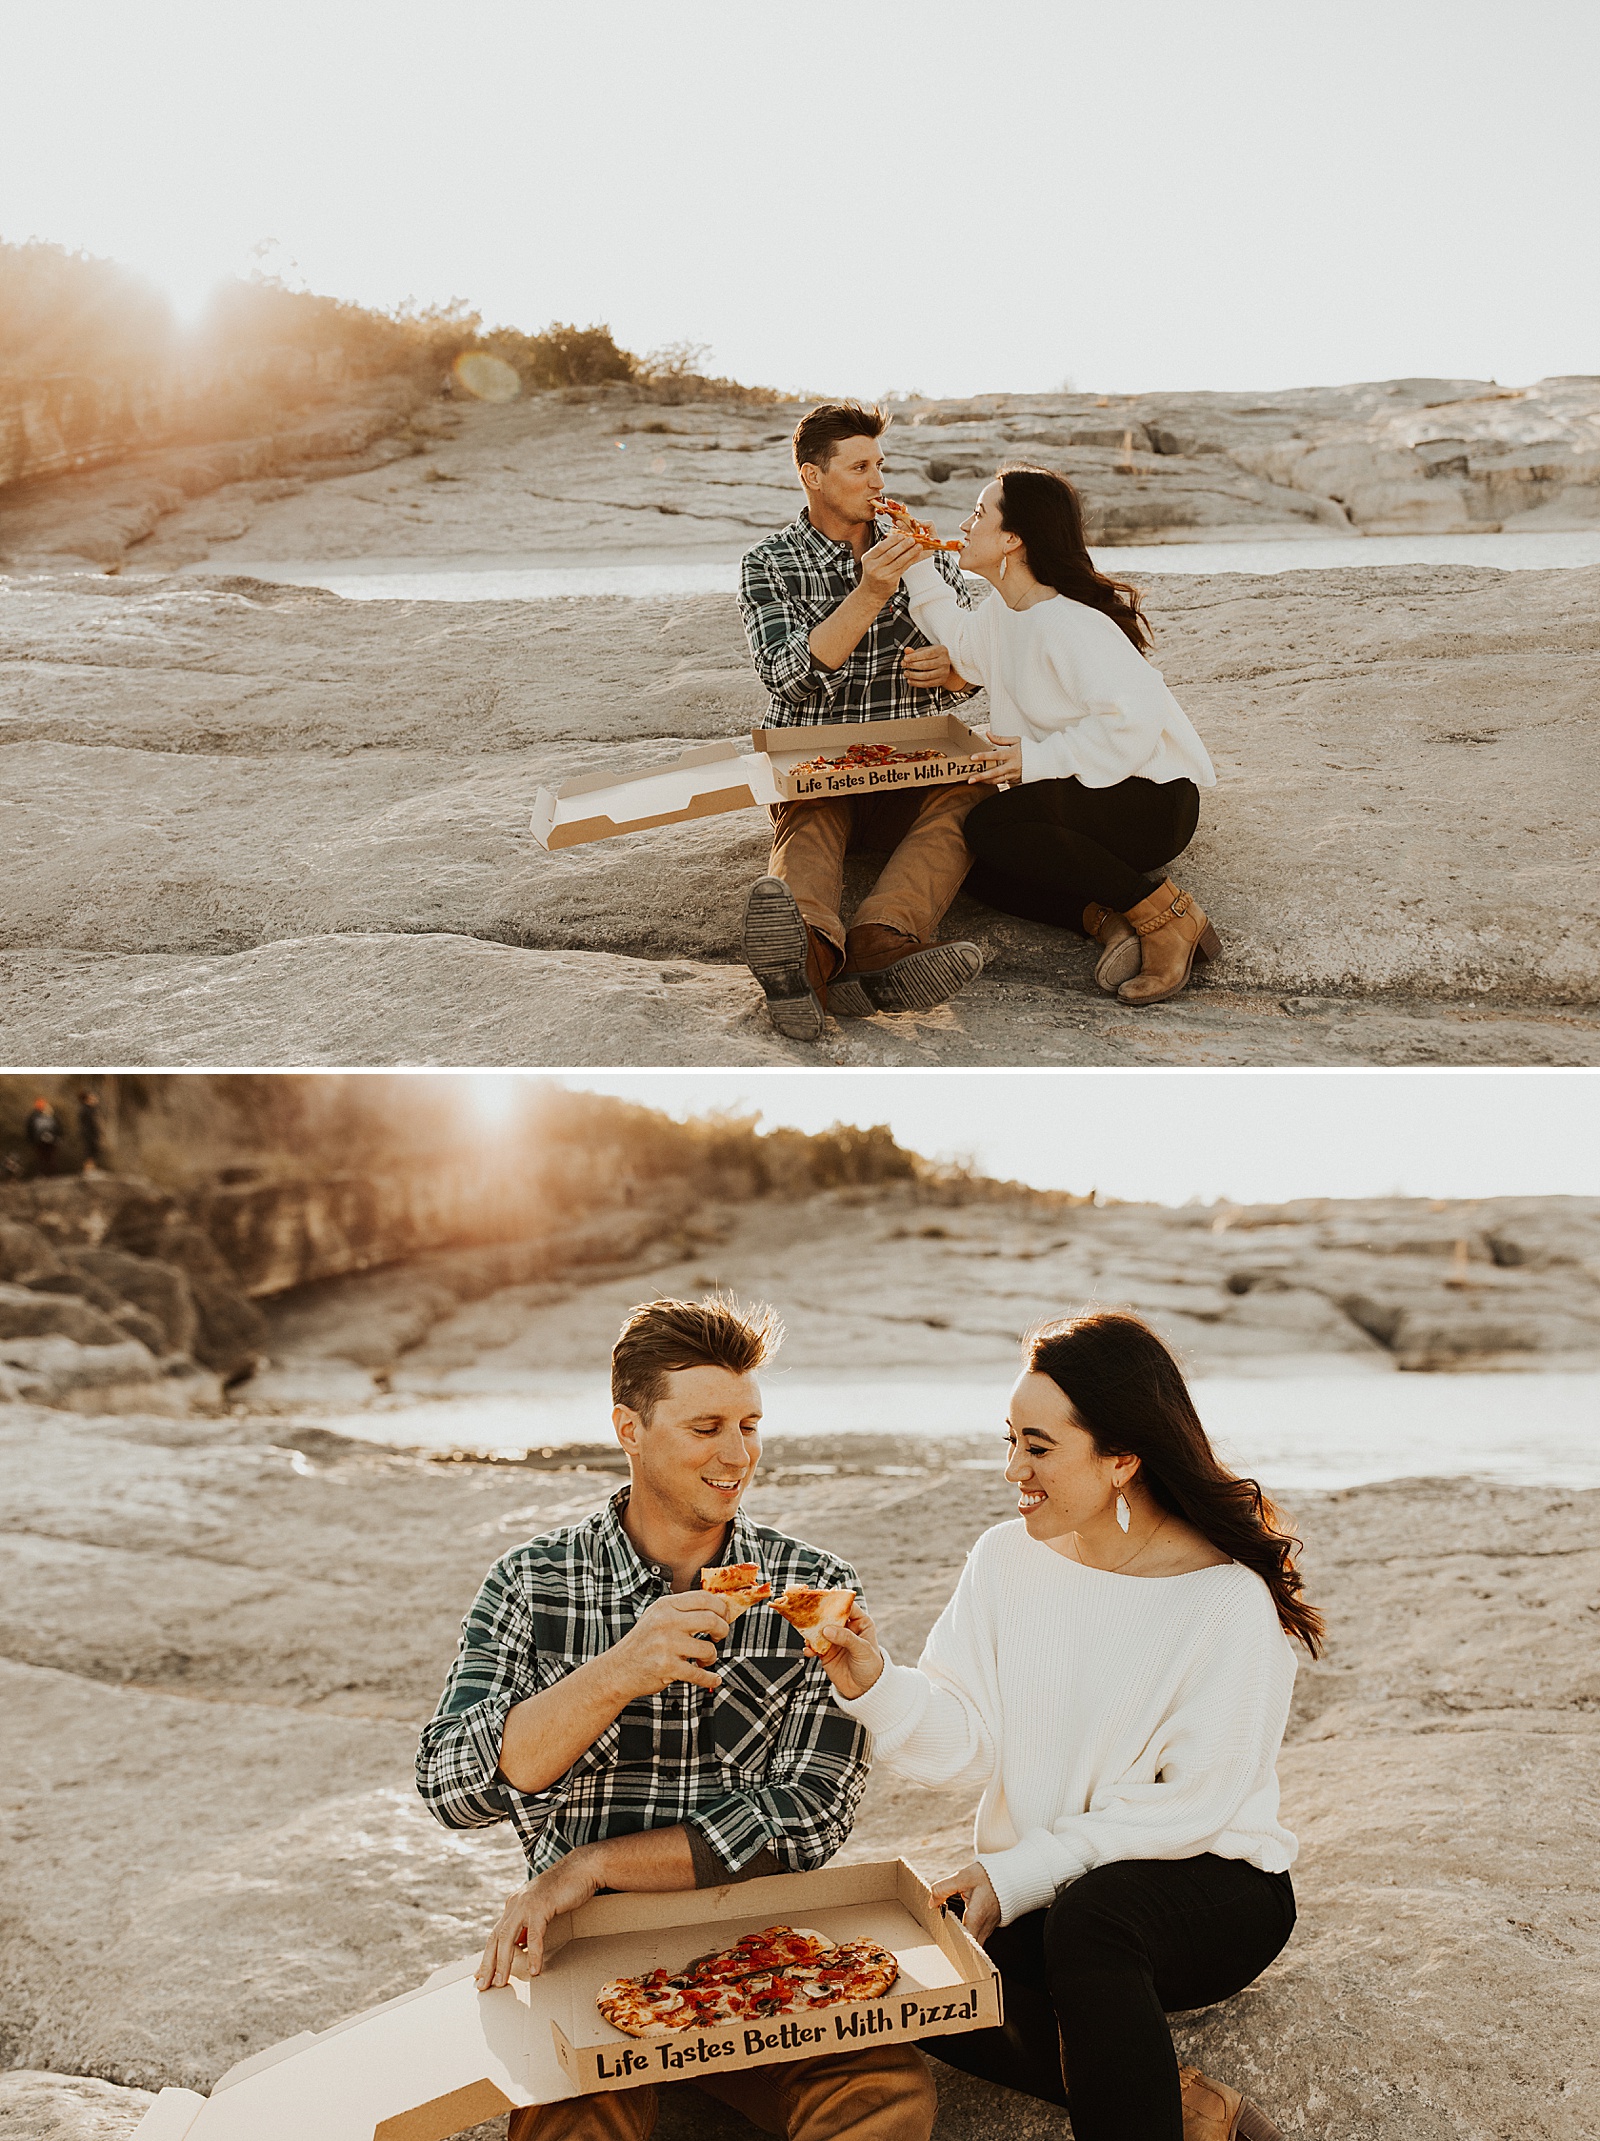 There are just so many amazing Austin engagement photo locations, like the beautiful Pedernales Falls. 